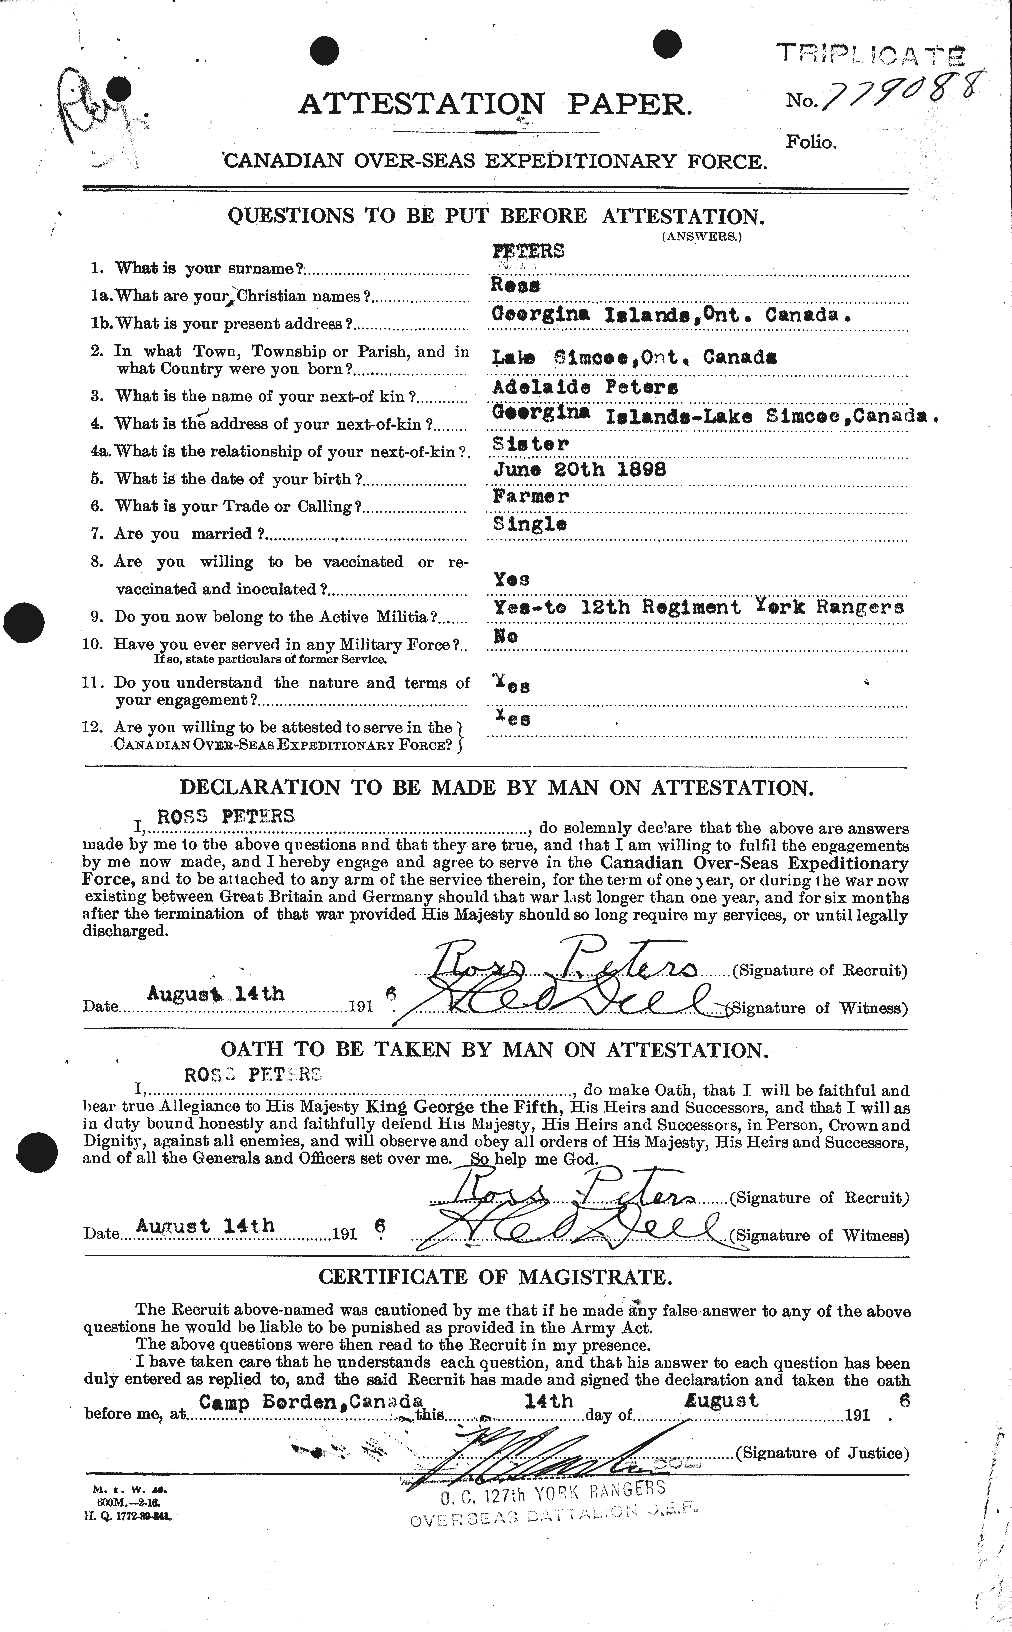 Personnel Records of the First World War - CEF 575614a